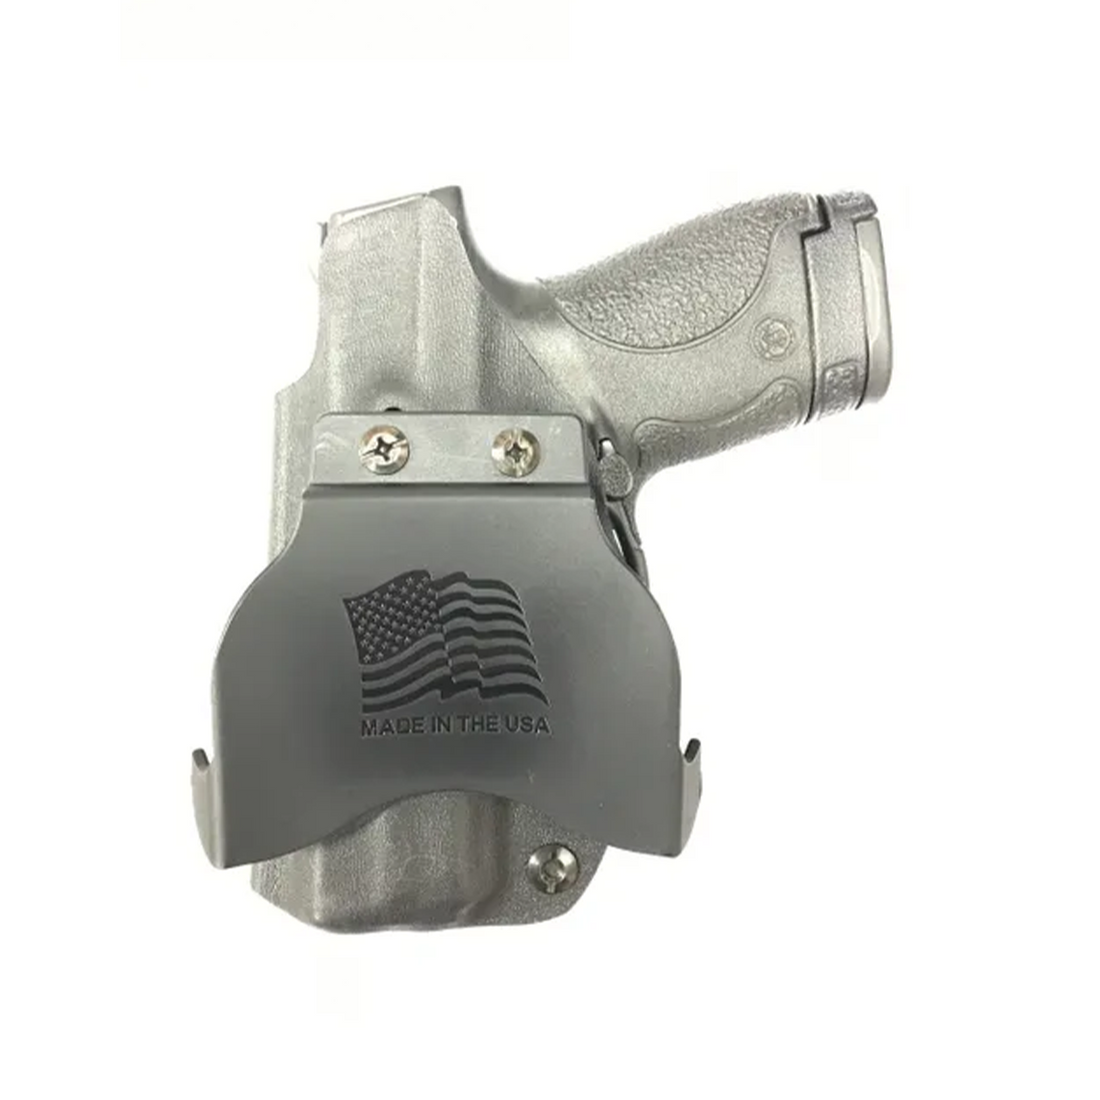 Palmetto State Armory IWB/OWB 2-n-1 Paddle Holsters